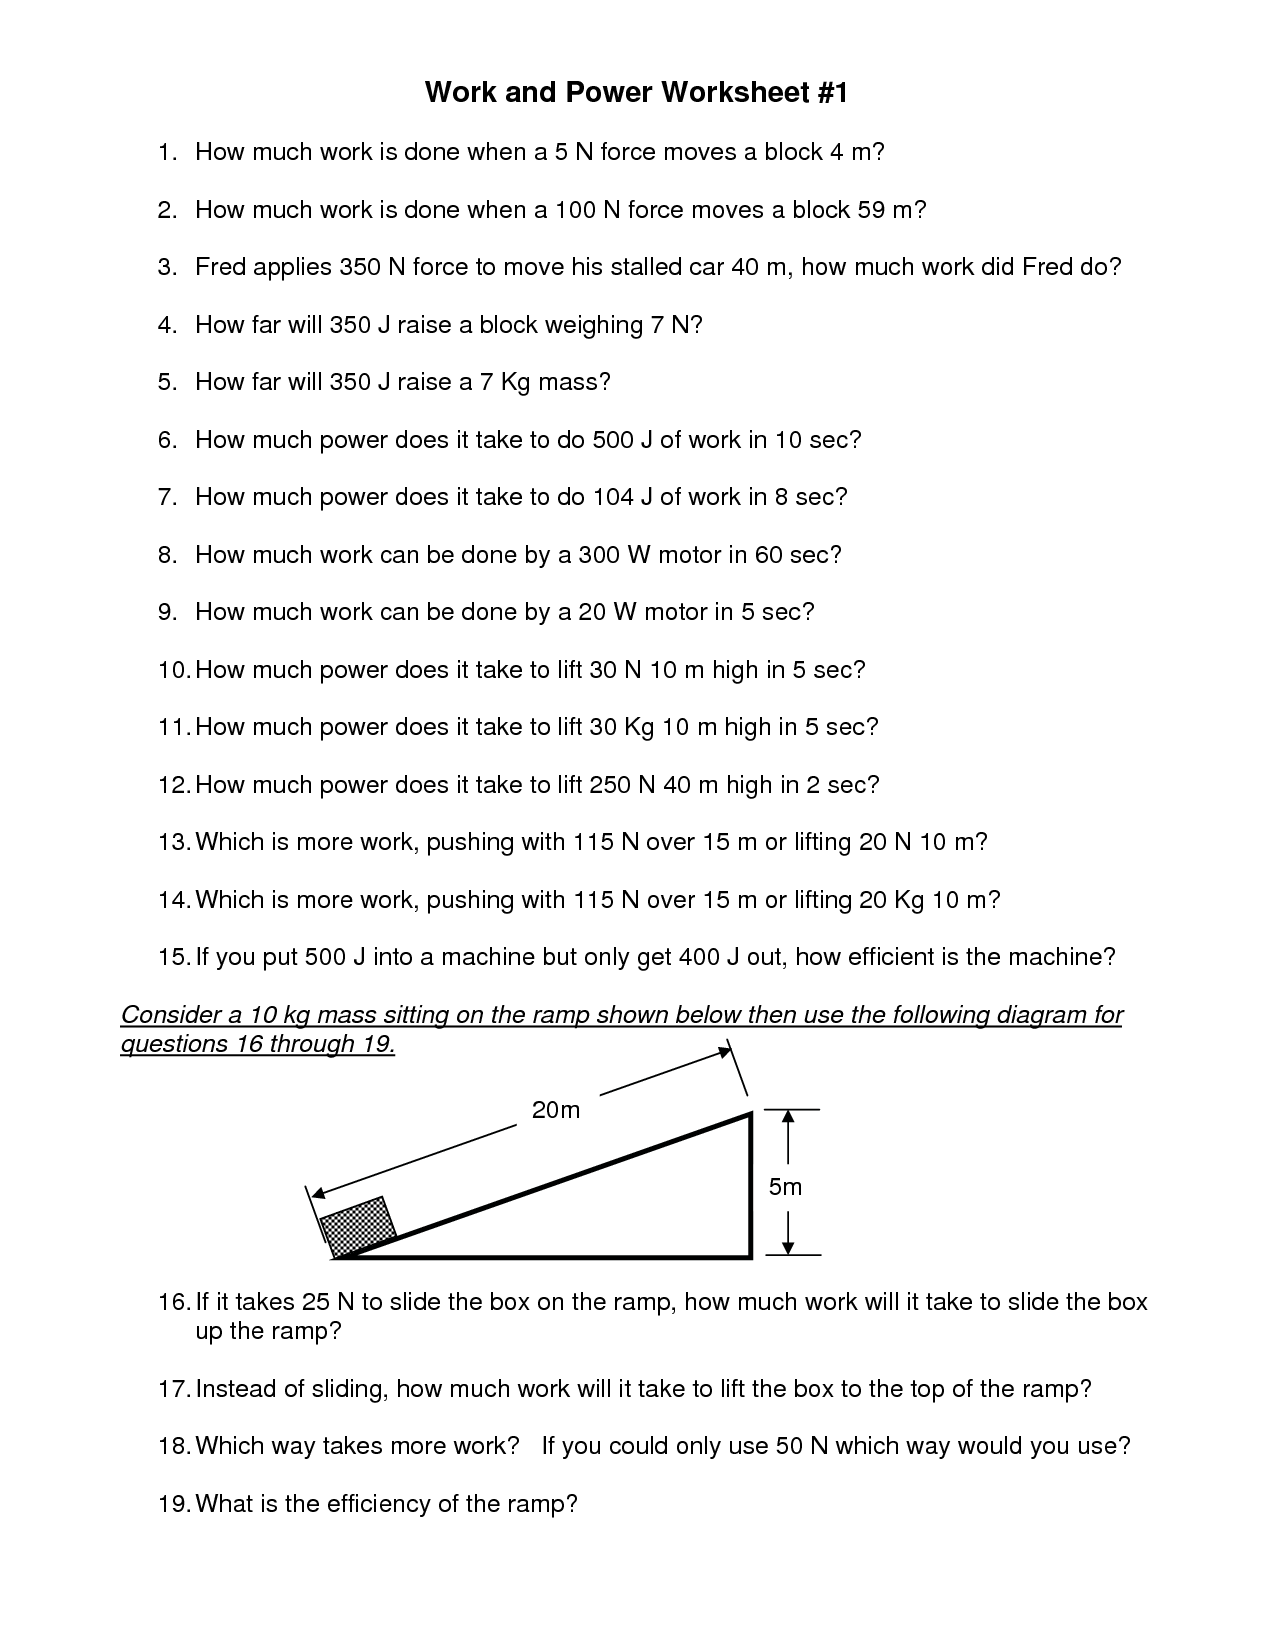 12 Best Images of Work Power And Energy Worksheet - Physics Work and